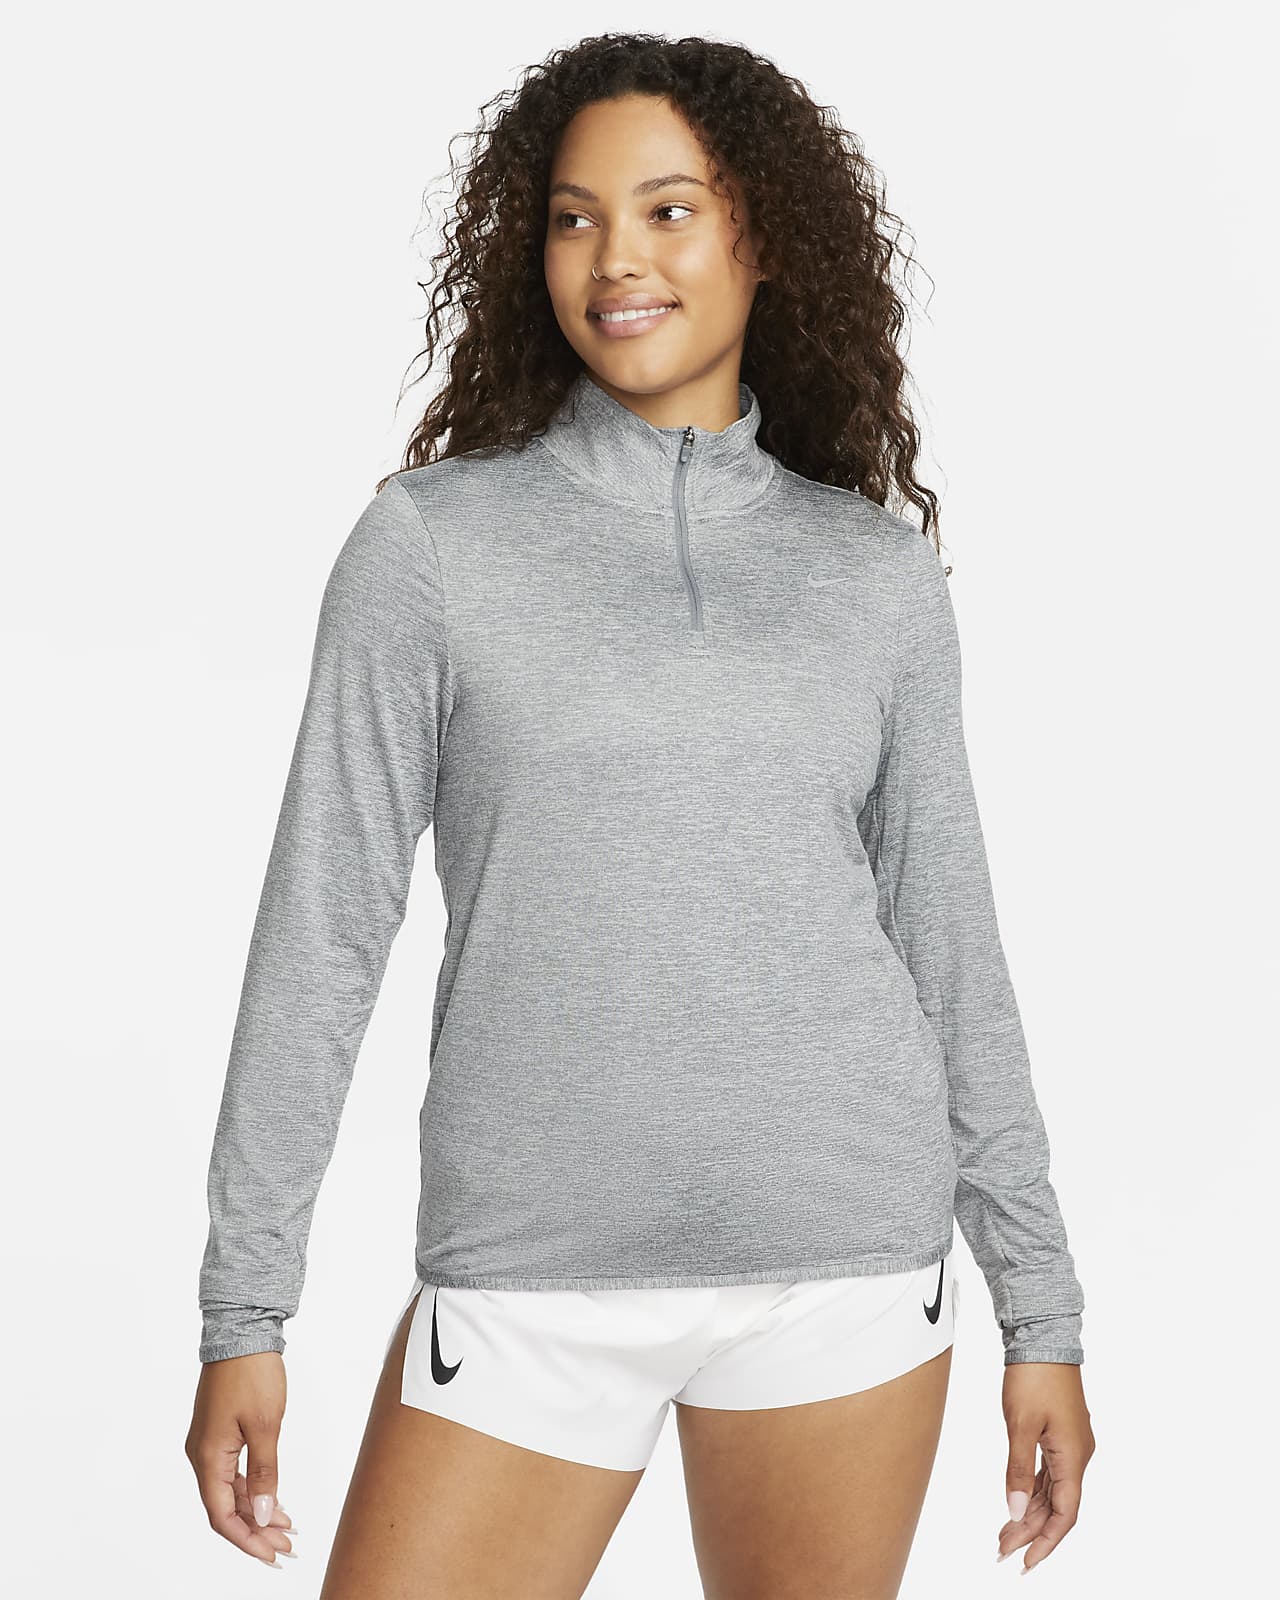 Nike Women's 'Element' Dri-Fit Half Zip Performance Top  Athletic outfits,  Womens athletic outfits, Performance tops